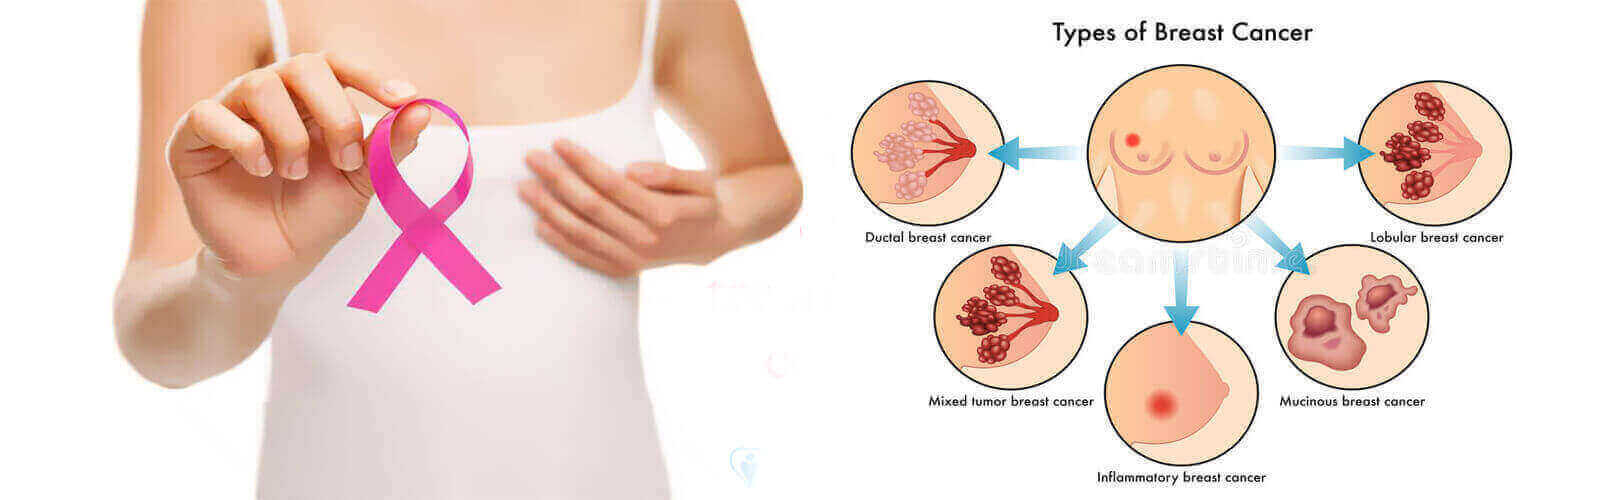 Breast Cancer Treatment in Canada